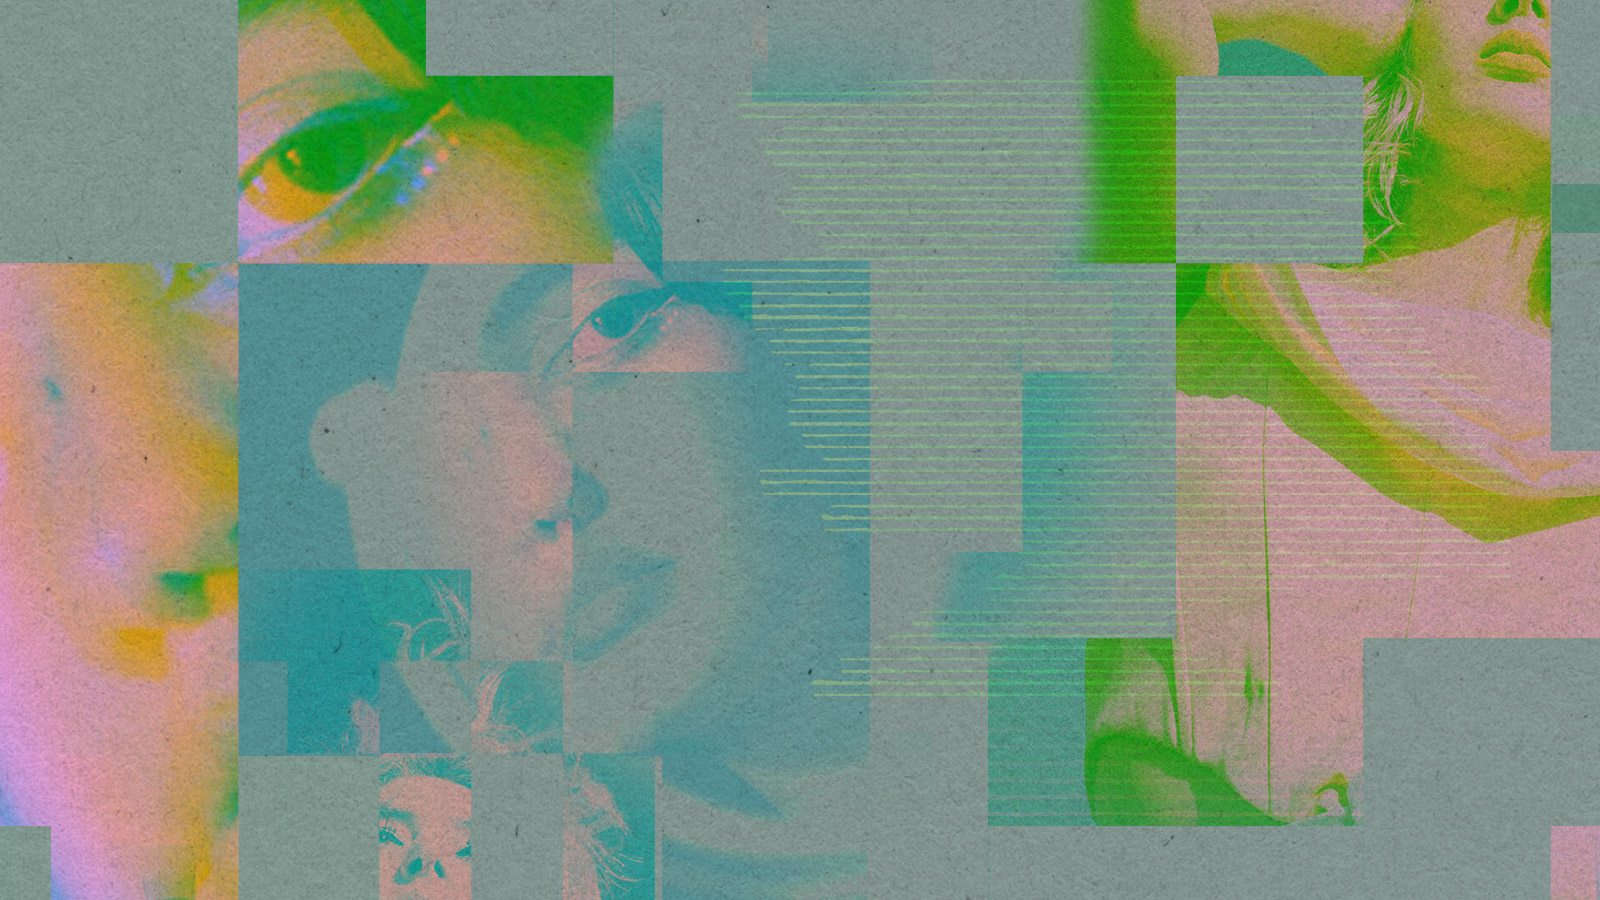 glitched images of teenage girls